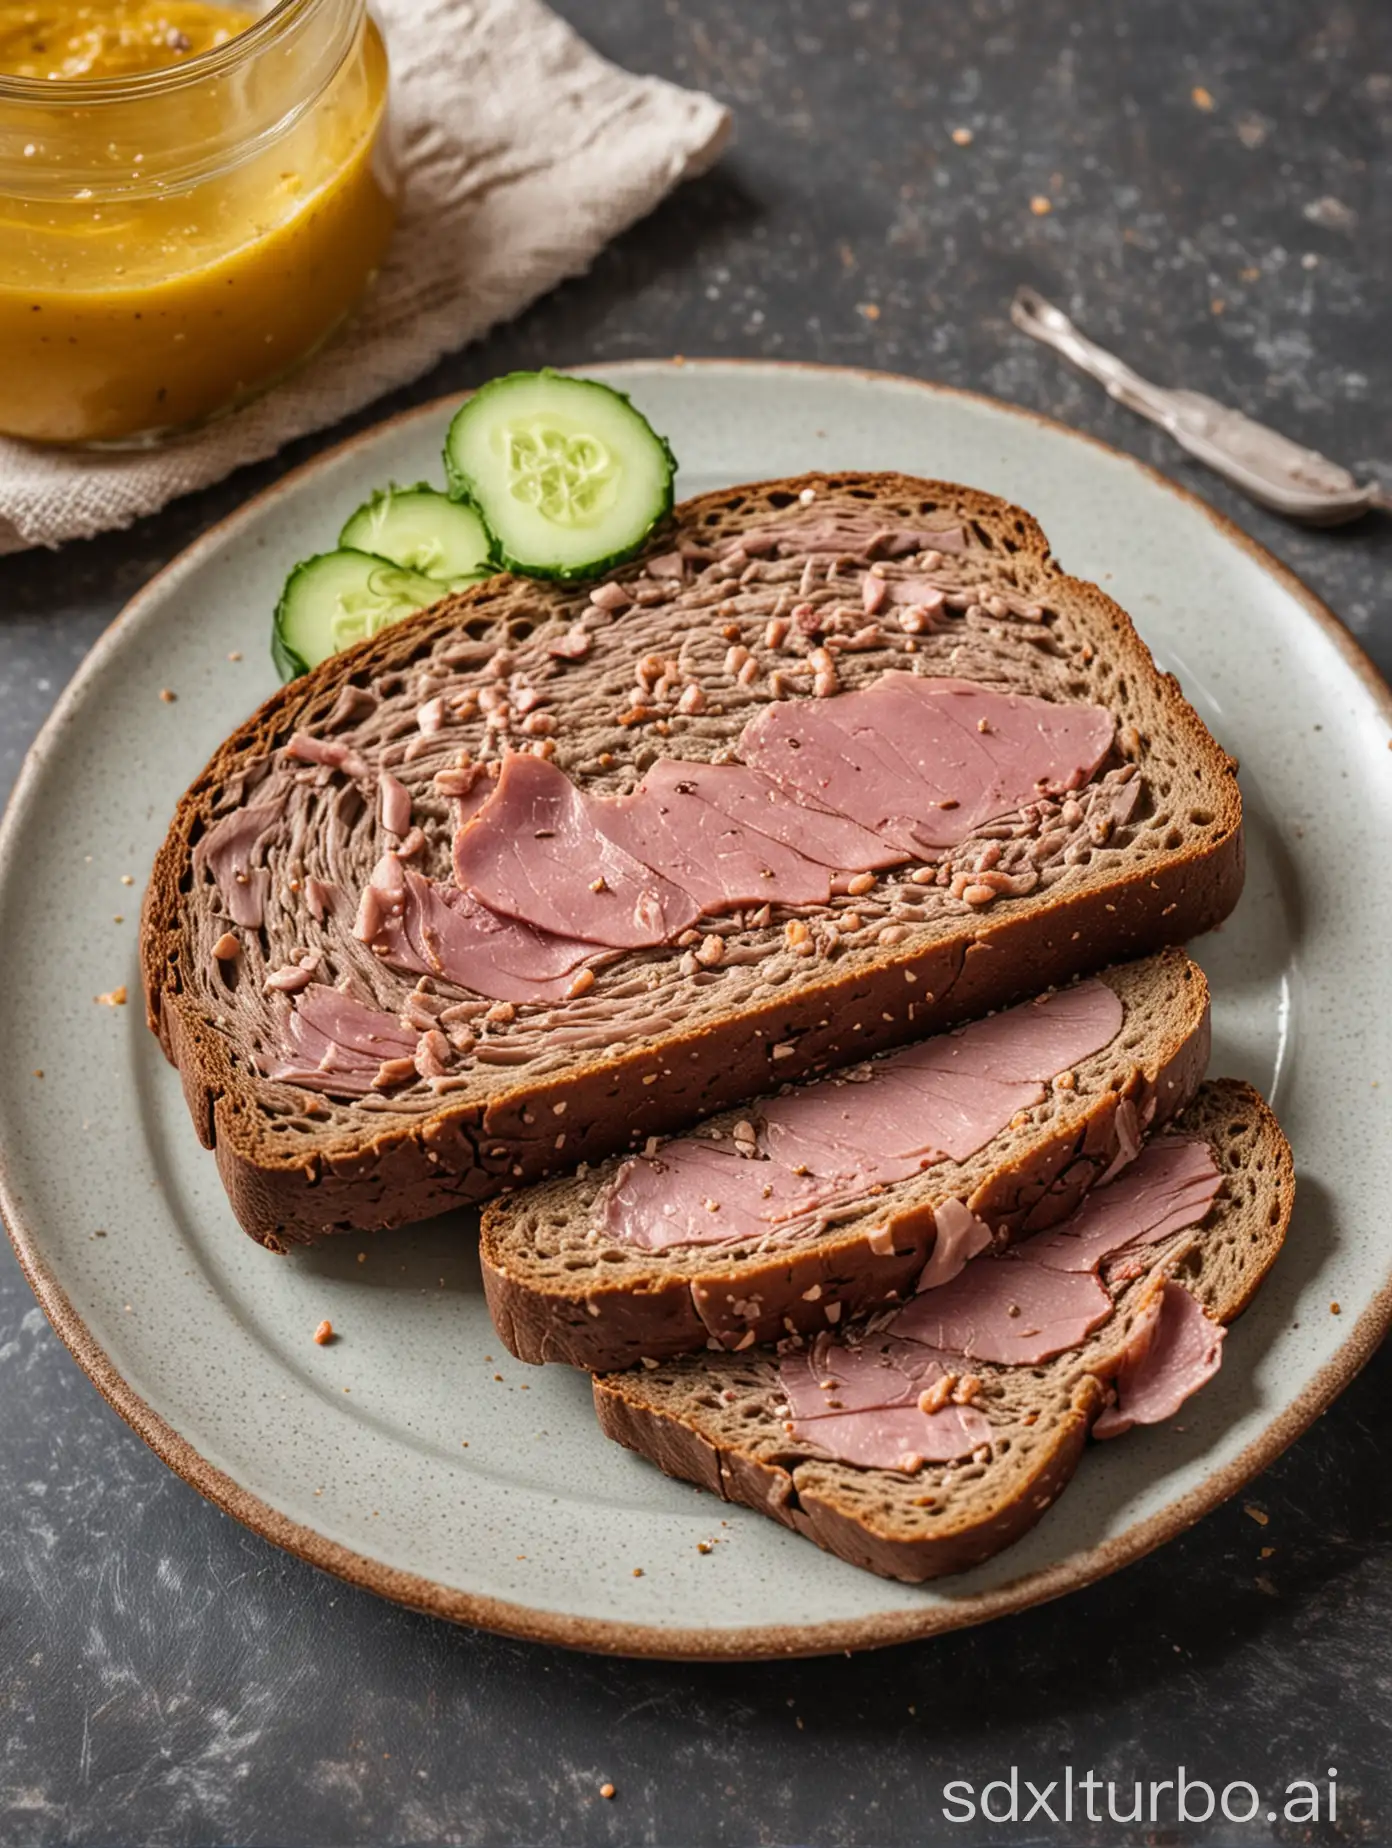 A slice of German black bread lies on a plate. On the slice lies a slice of cooked ham. The rest of the bread loaf is not filled with ham. On the plate there is still a cucumber and some mustard.